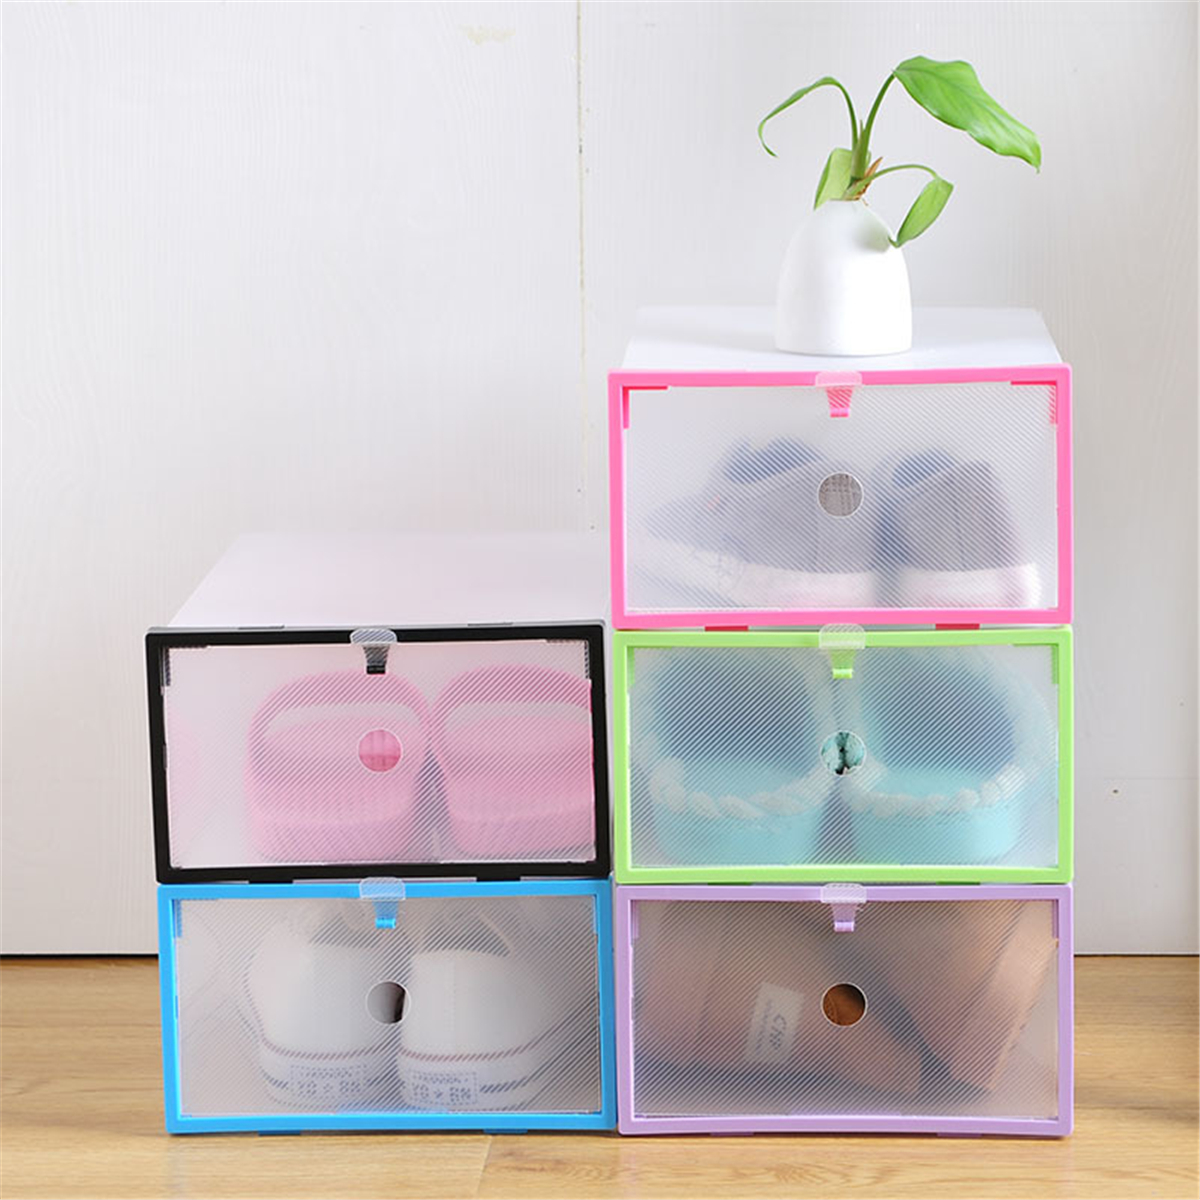 

Foldable Clear Plastic Shoe Boxes Storage Organizer Stackable Tidy Display Box Baskets